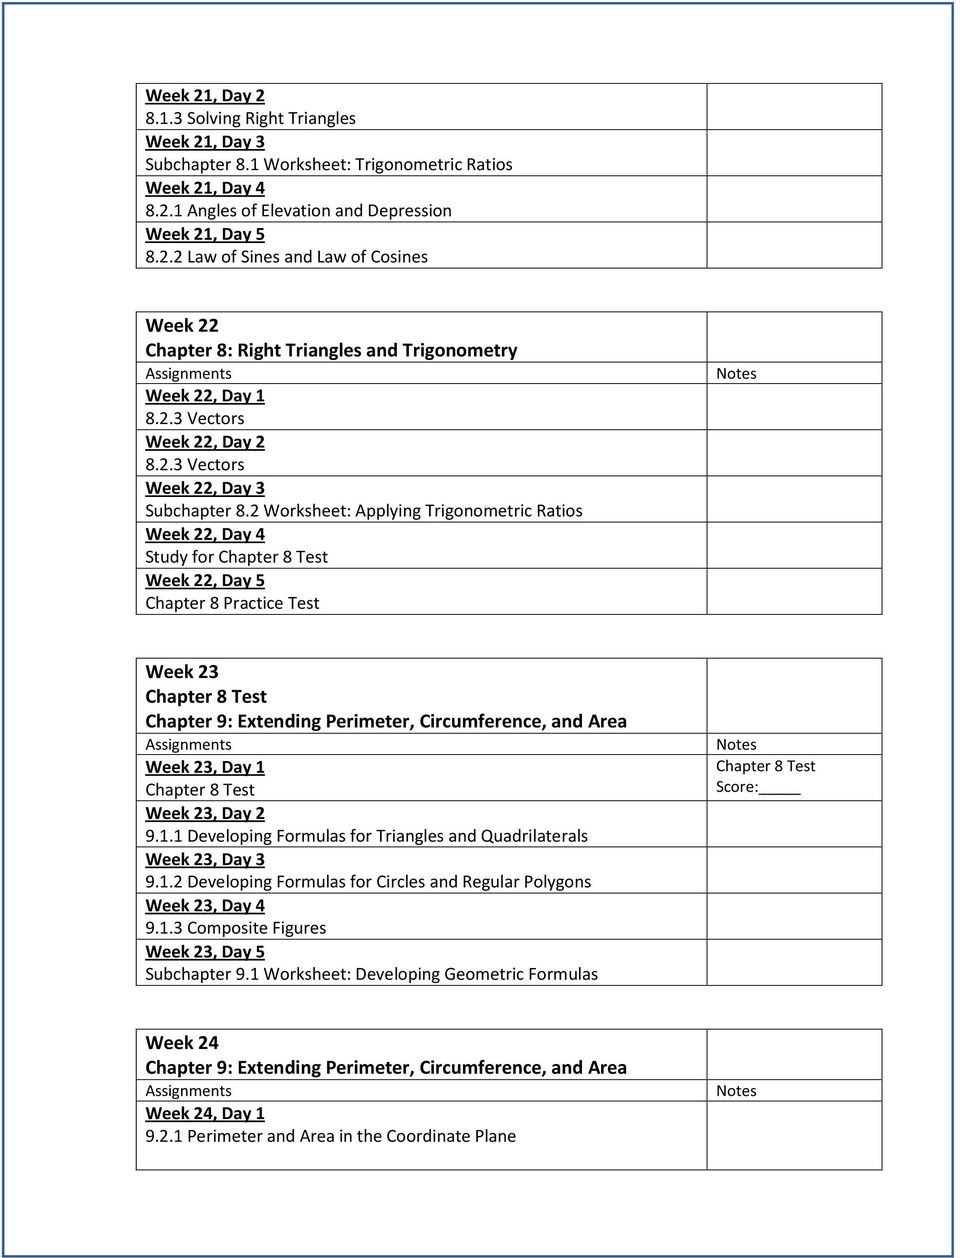 2 Worksheet: Applying Trigonometric Ratios Week 22, Day 4 Study for Chapter 8 Test Week 22, Day 5 Chapter 8 Practice Test Week 23 Chapter 8 Test Chapter 9: Extending Perimeter, Circumference, and